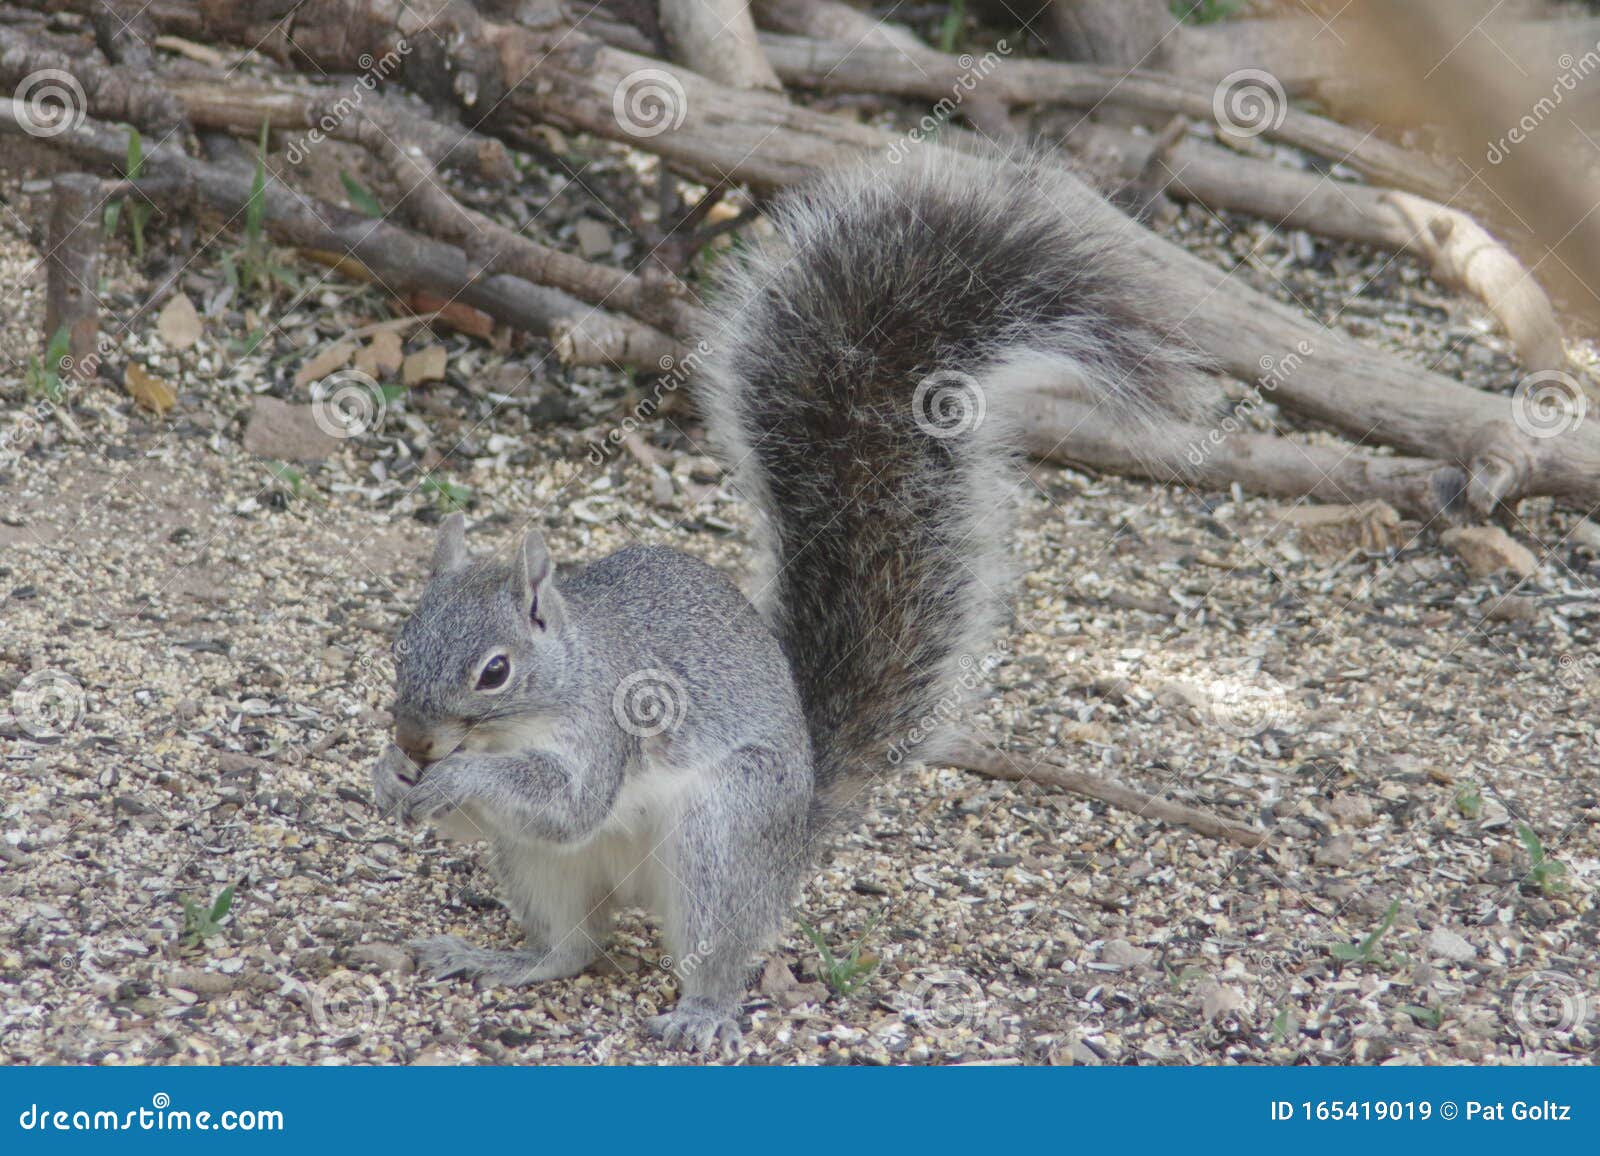 Rock Squirrel Munching Lunch Stock Image - Image of seeds, otospermophilus:  165419019